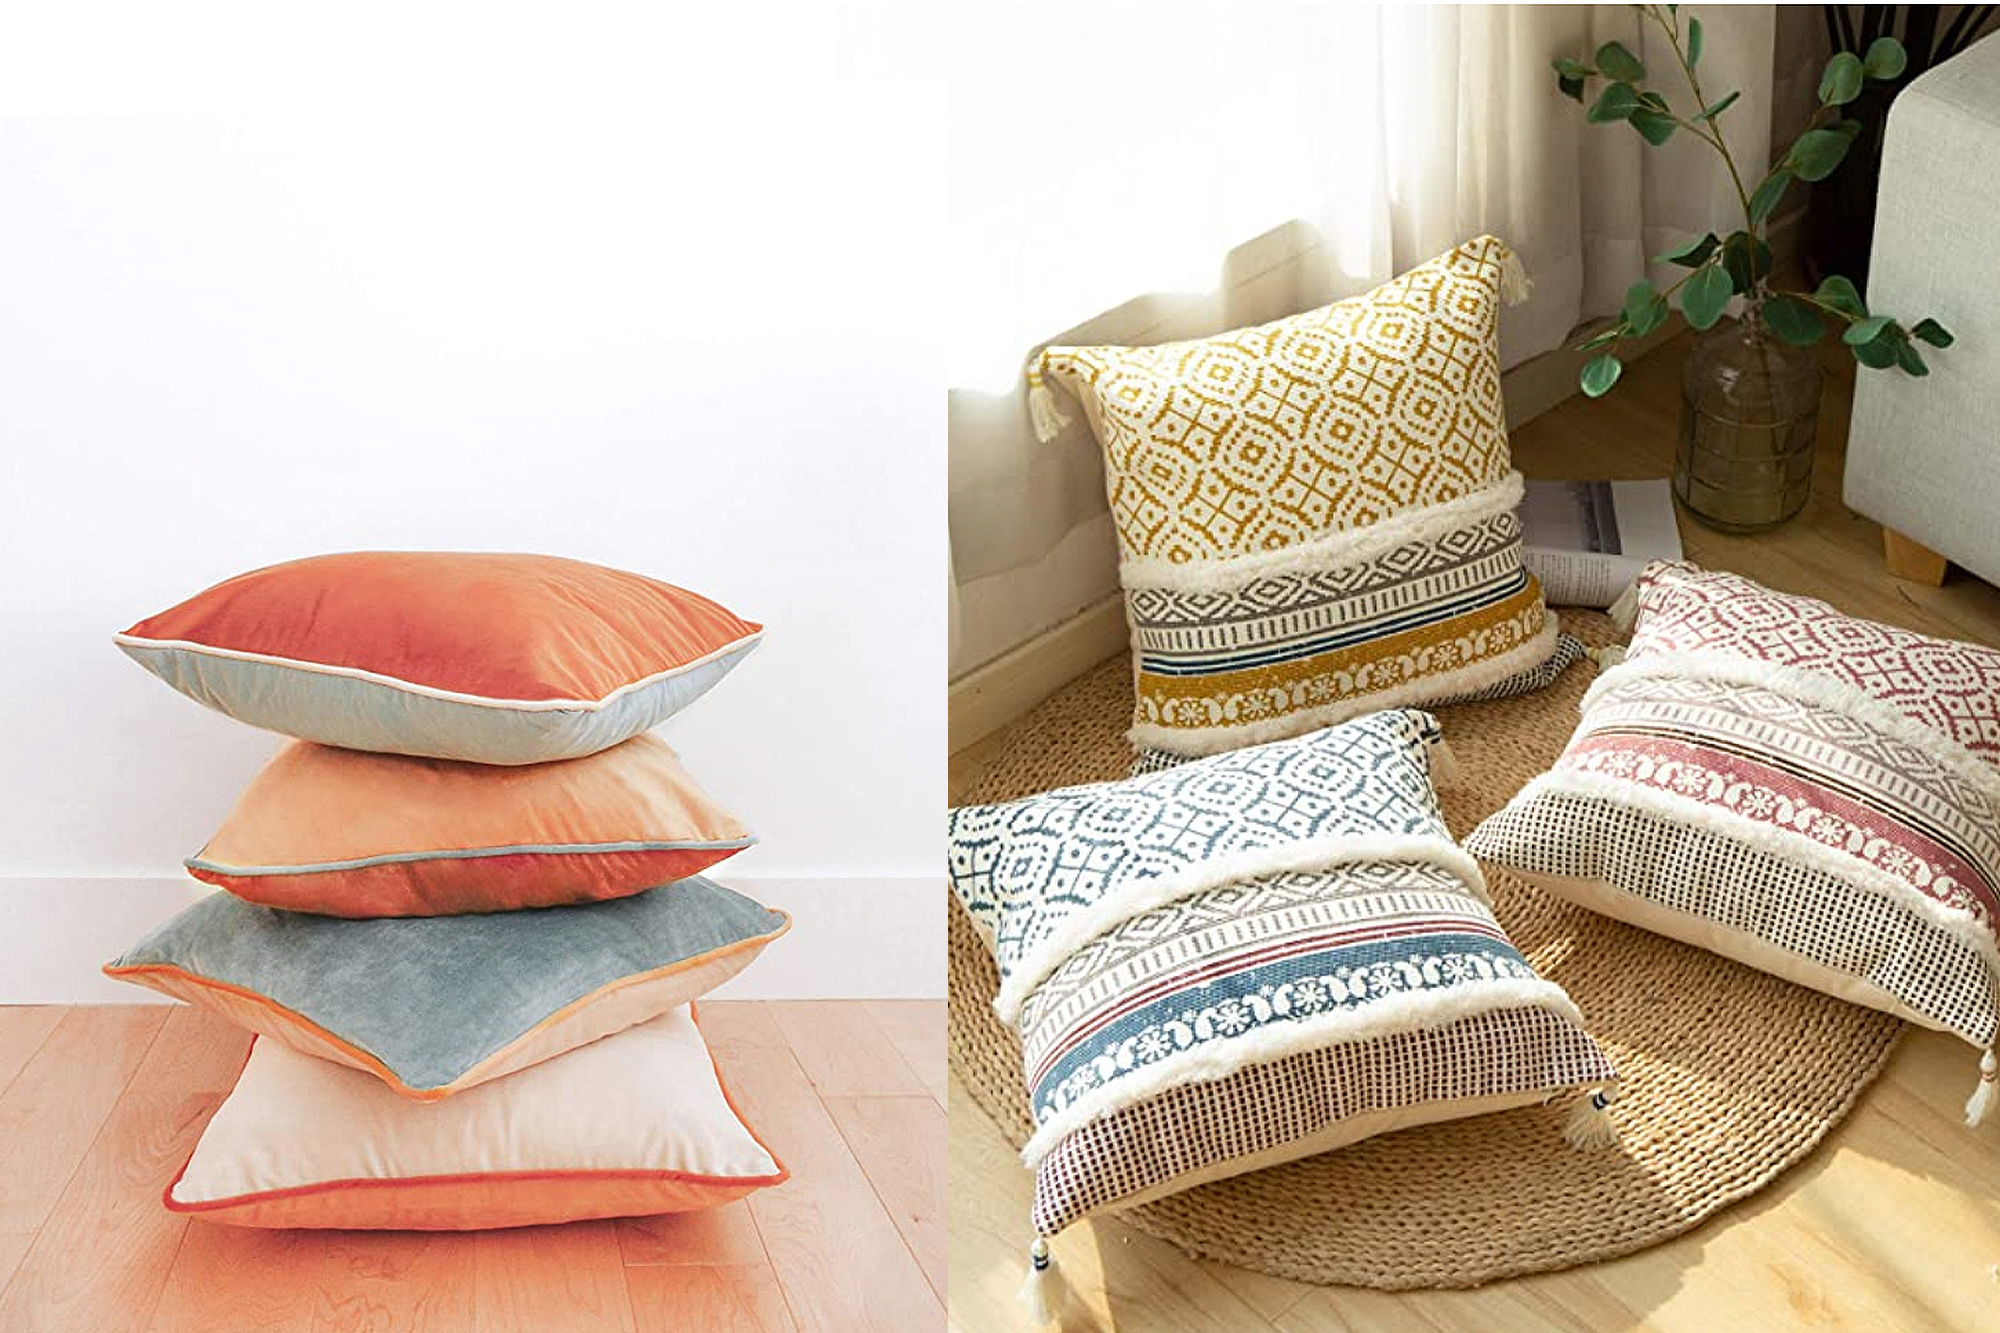 7 Boho-Chic Pillow Covers to Upgrade Your Home Decor